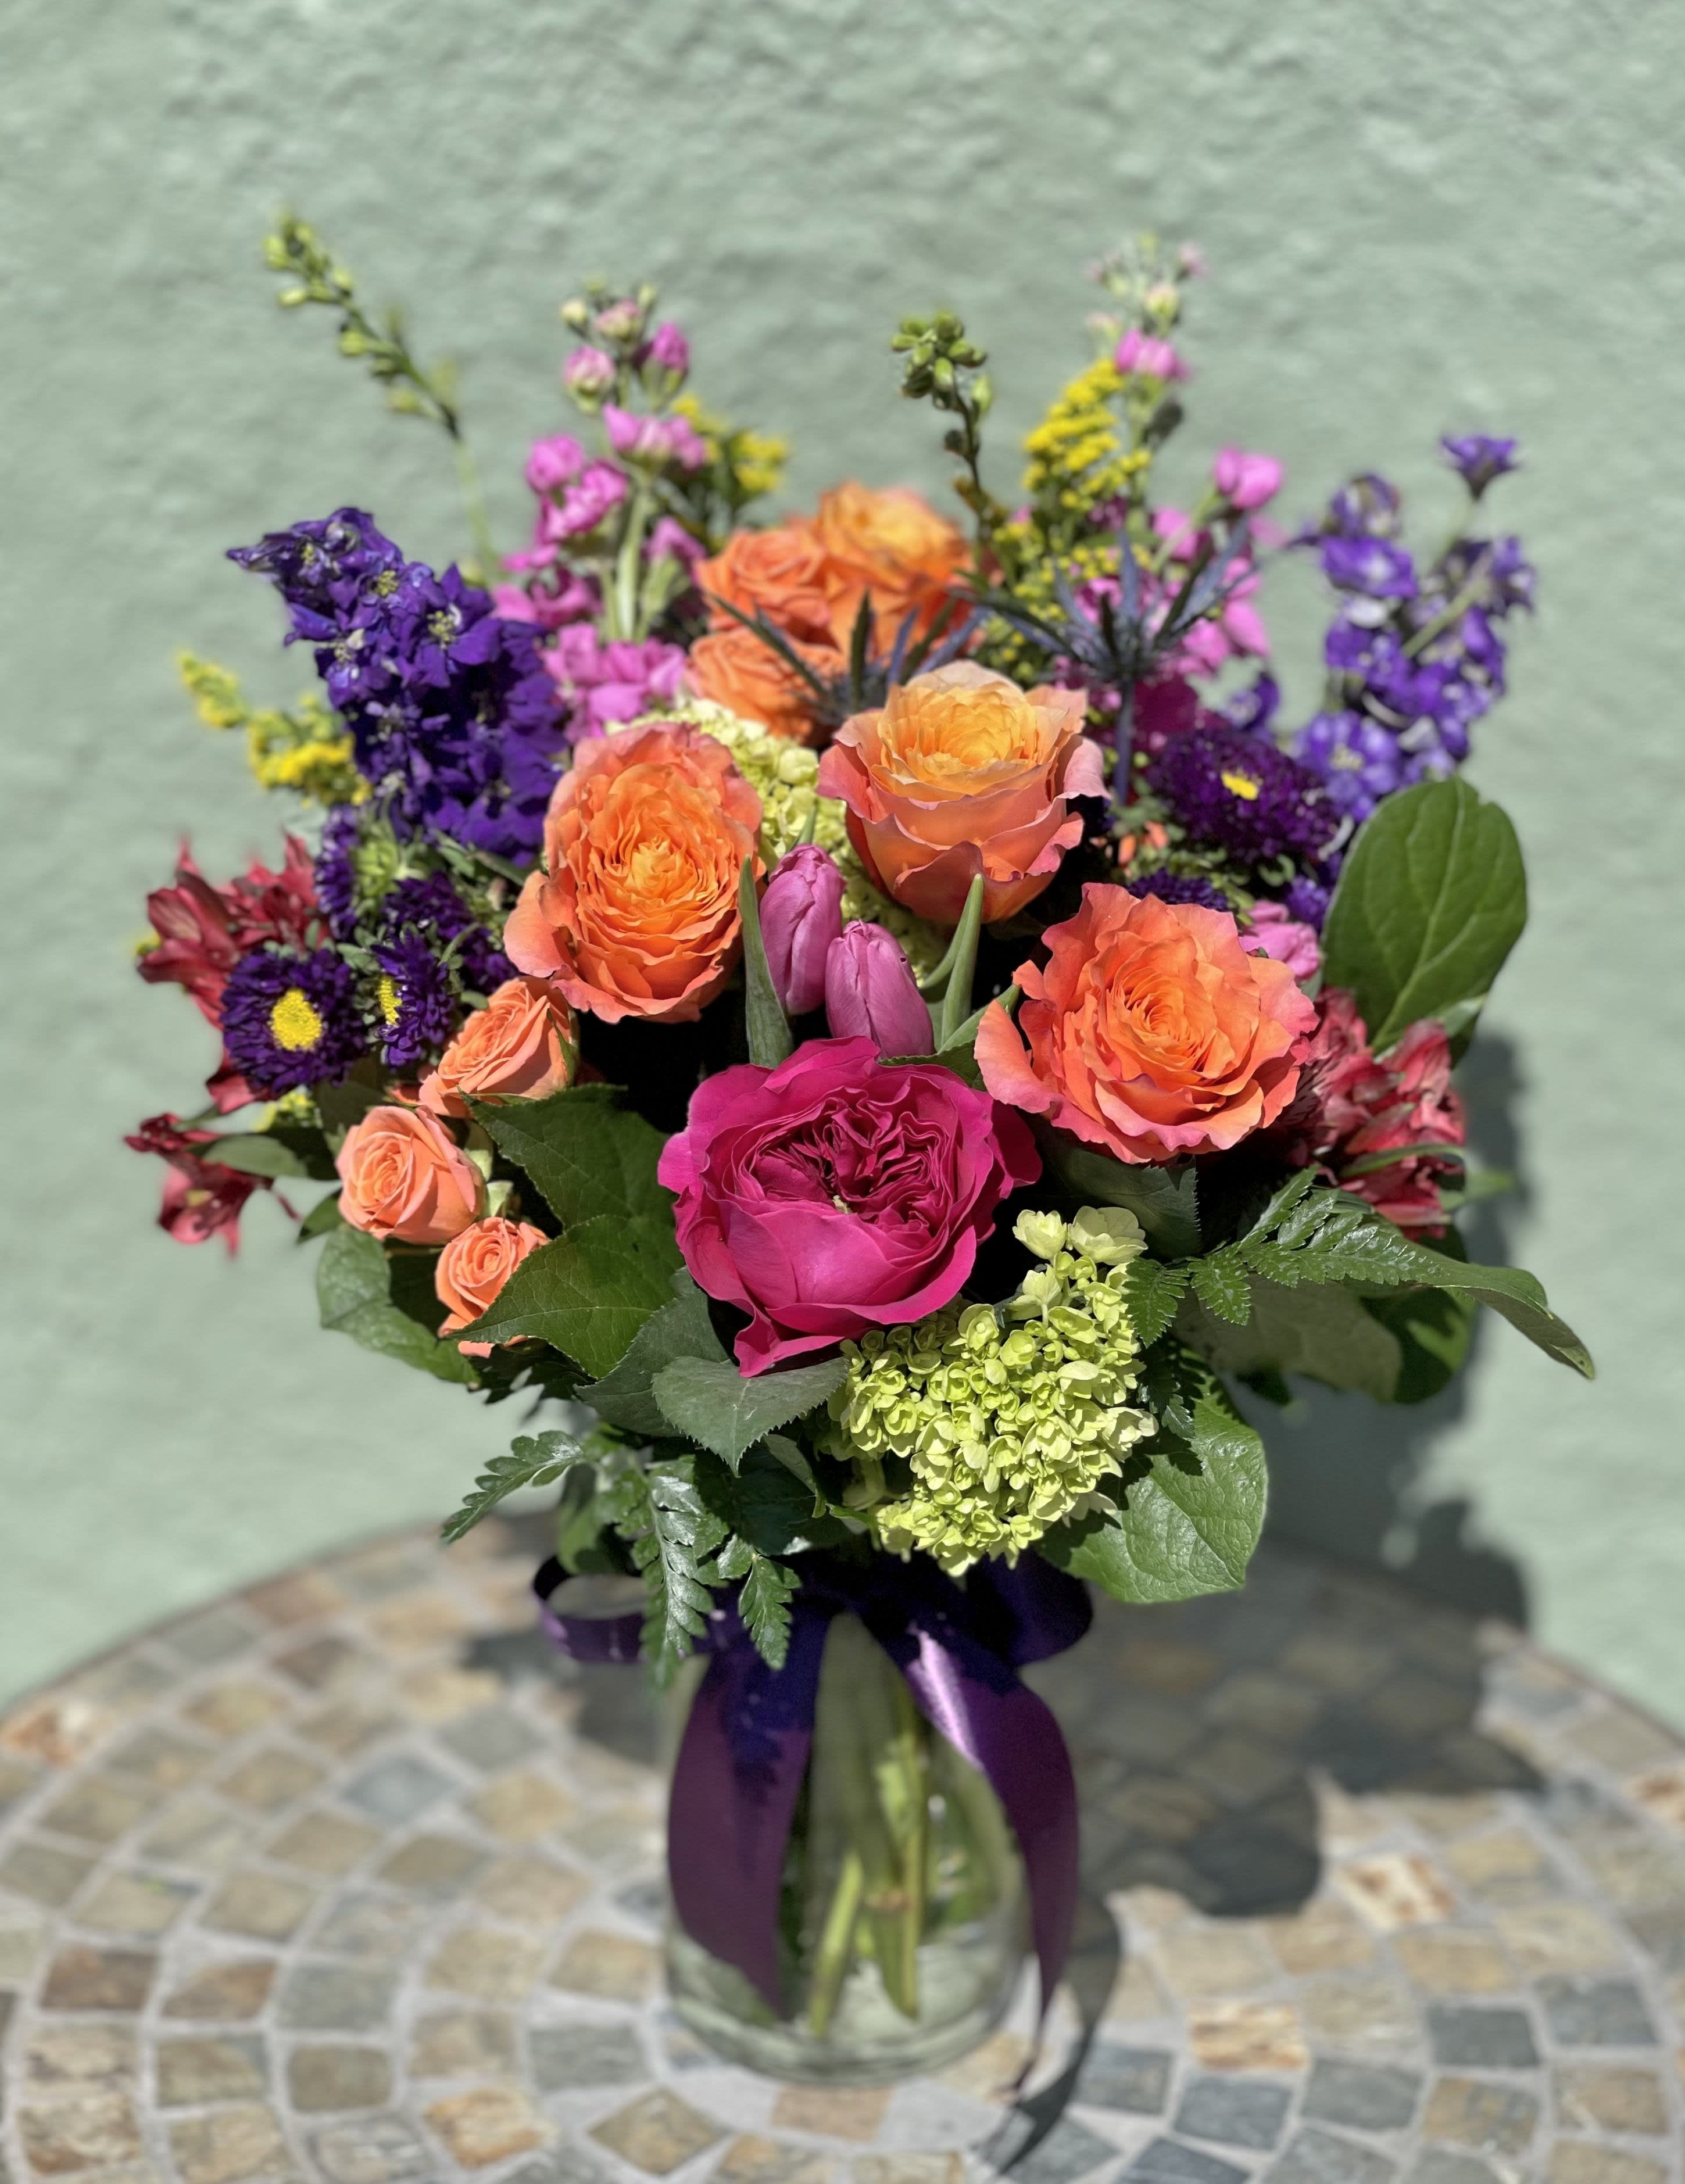 Encanto - Striking vivid colorful arrangement with garden roses, hydrangea, larkspurs and more. For a colorful person!